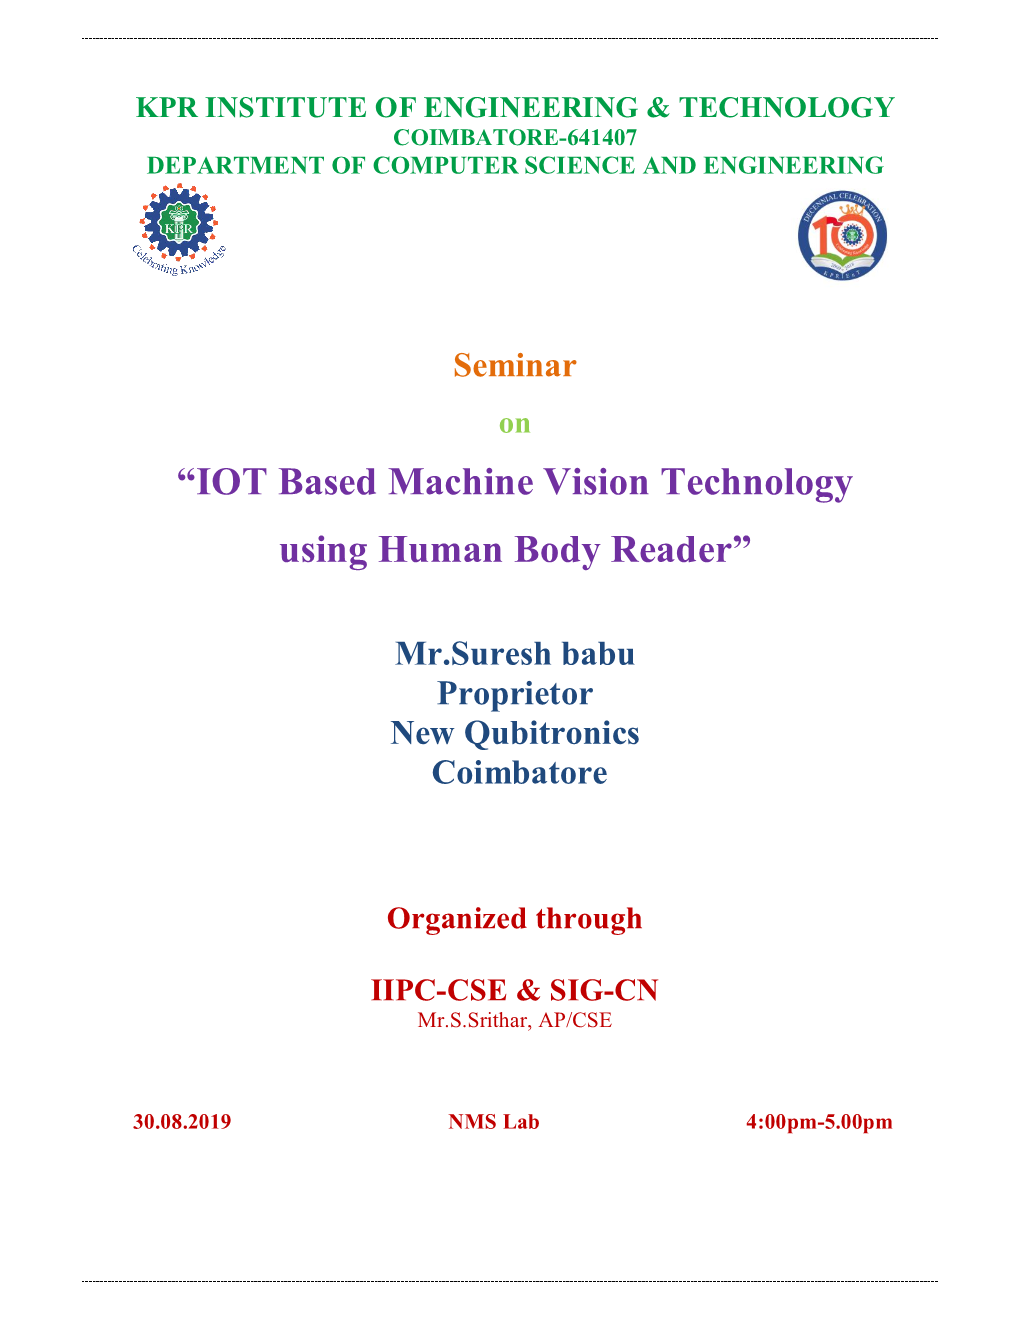 “IOT Based Machine Vision Technology Using Human Body Reader”